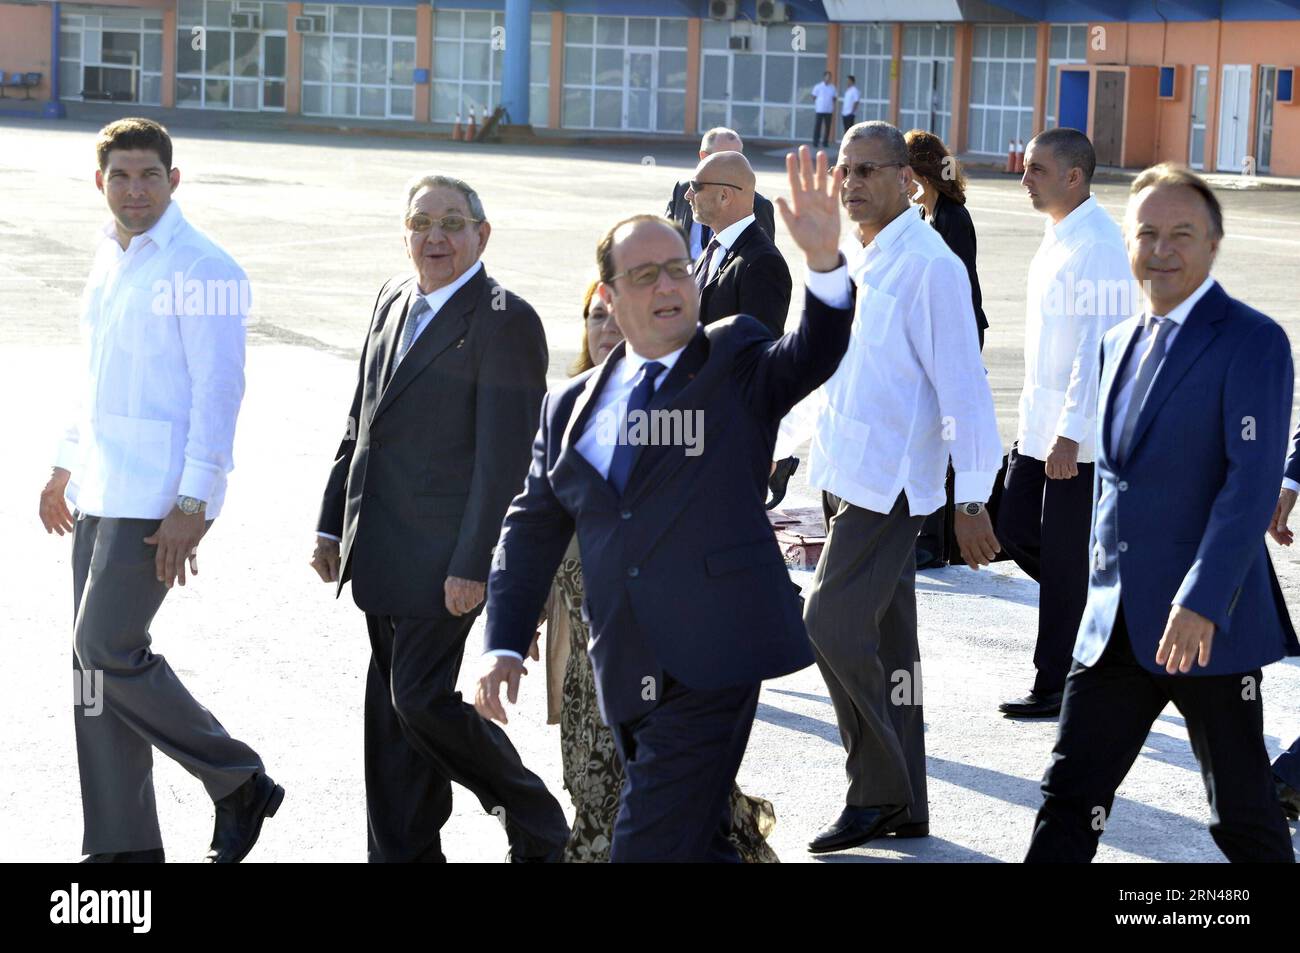 (150512) -- HAVANA, May 12, 2015 -- French President Francois Hollande (C), accompanied by his Cuban counterpart Raul Castro (2nd L), waves hands upon his departure for Haiti in the Jose Marti International Airport, Havana, Cuba, on May 12, 2015. French President Francois Hollande made a historic visit to Cuba on Monday, during which he sought to bolster relations with the island country by strengthening political and economic connections. Ferval/) (rtg) MADE QUALITY AVAILABLE CUBA-HAVANA-FRANCE-POLITICS-VISIT PRENSAxLATINA PUBLICATIONxNOTxINxCHN   150512 Havana May 12 2015 French President Fr Stock Photo